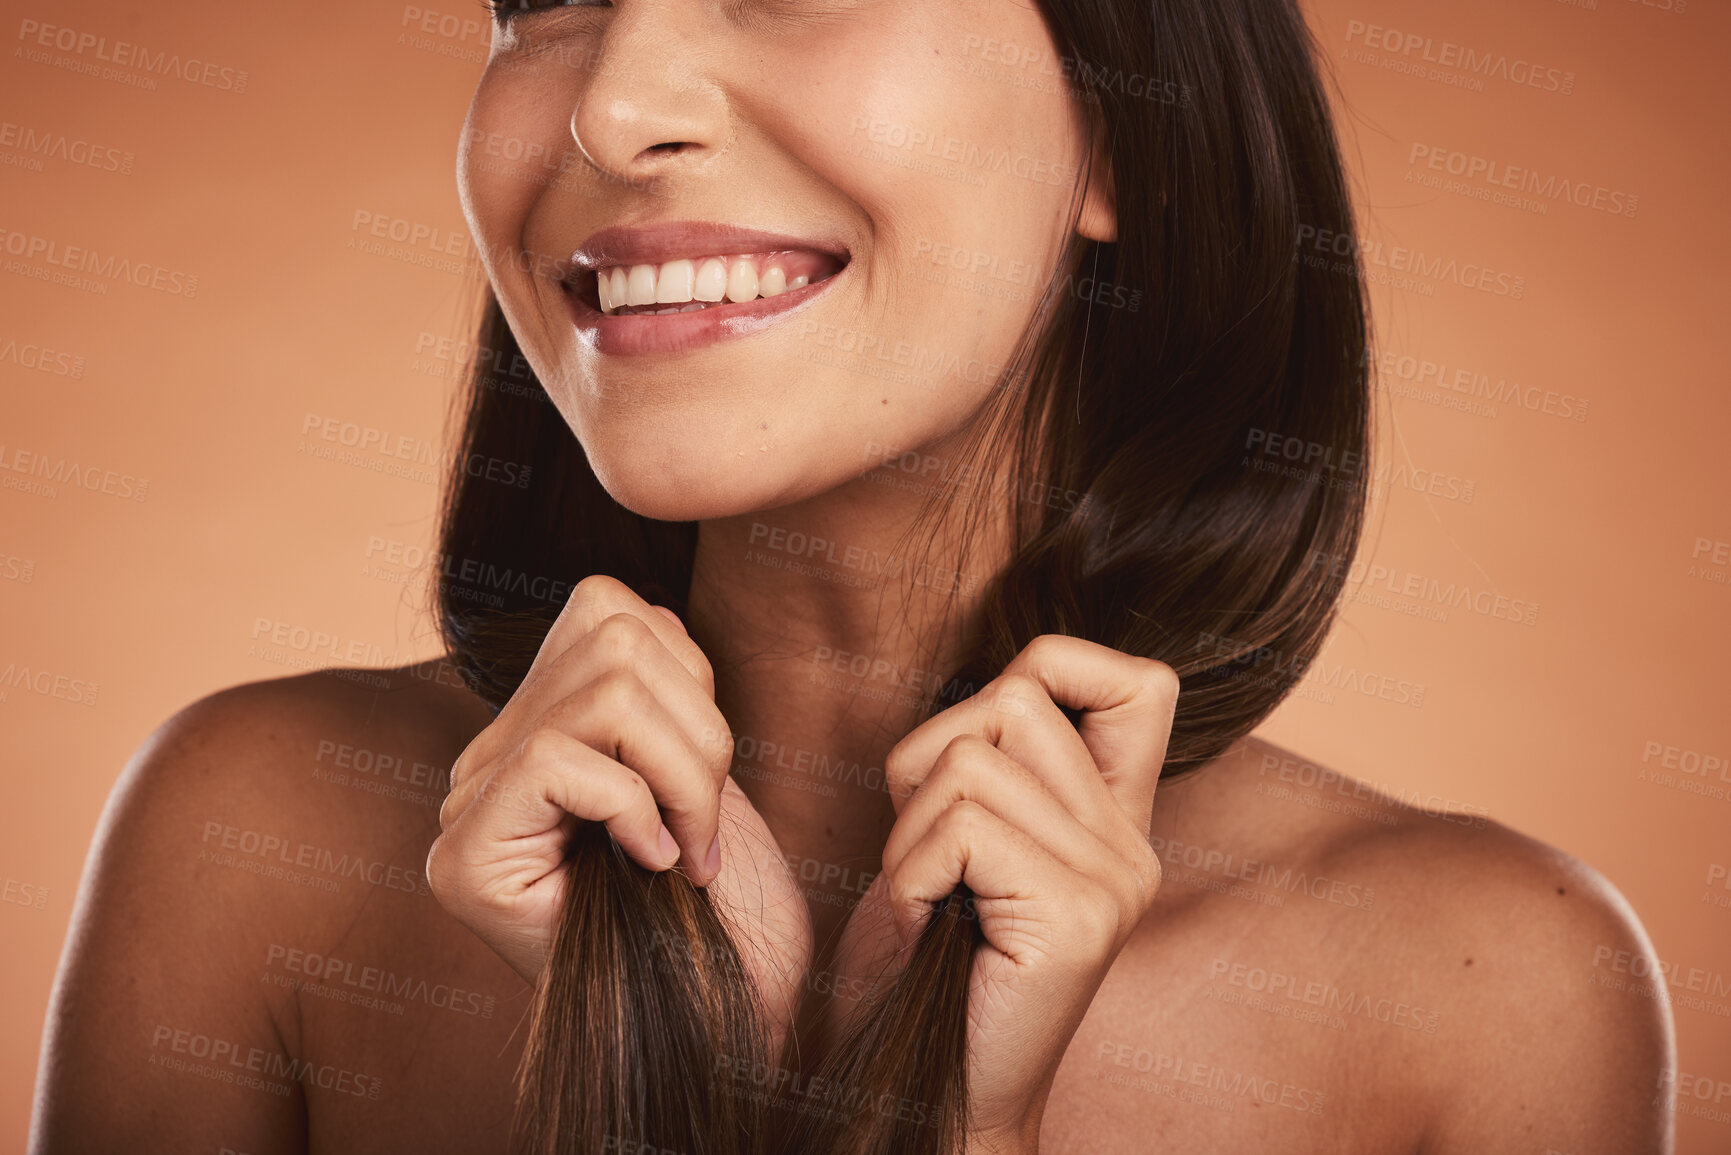 Buy stock photo Hair care, dental and face skincare of woman on brown studio background. Makeup, oral health and smile of female model holding long and healthy hair after luxury salon treatment for new hair style.

